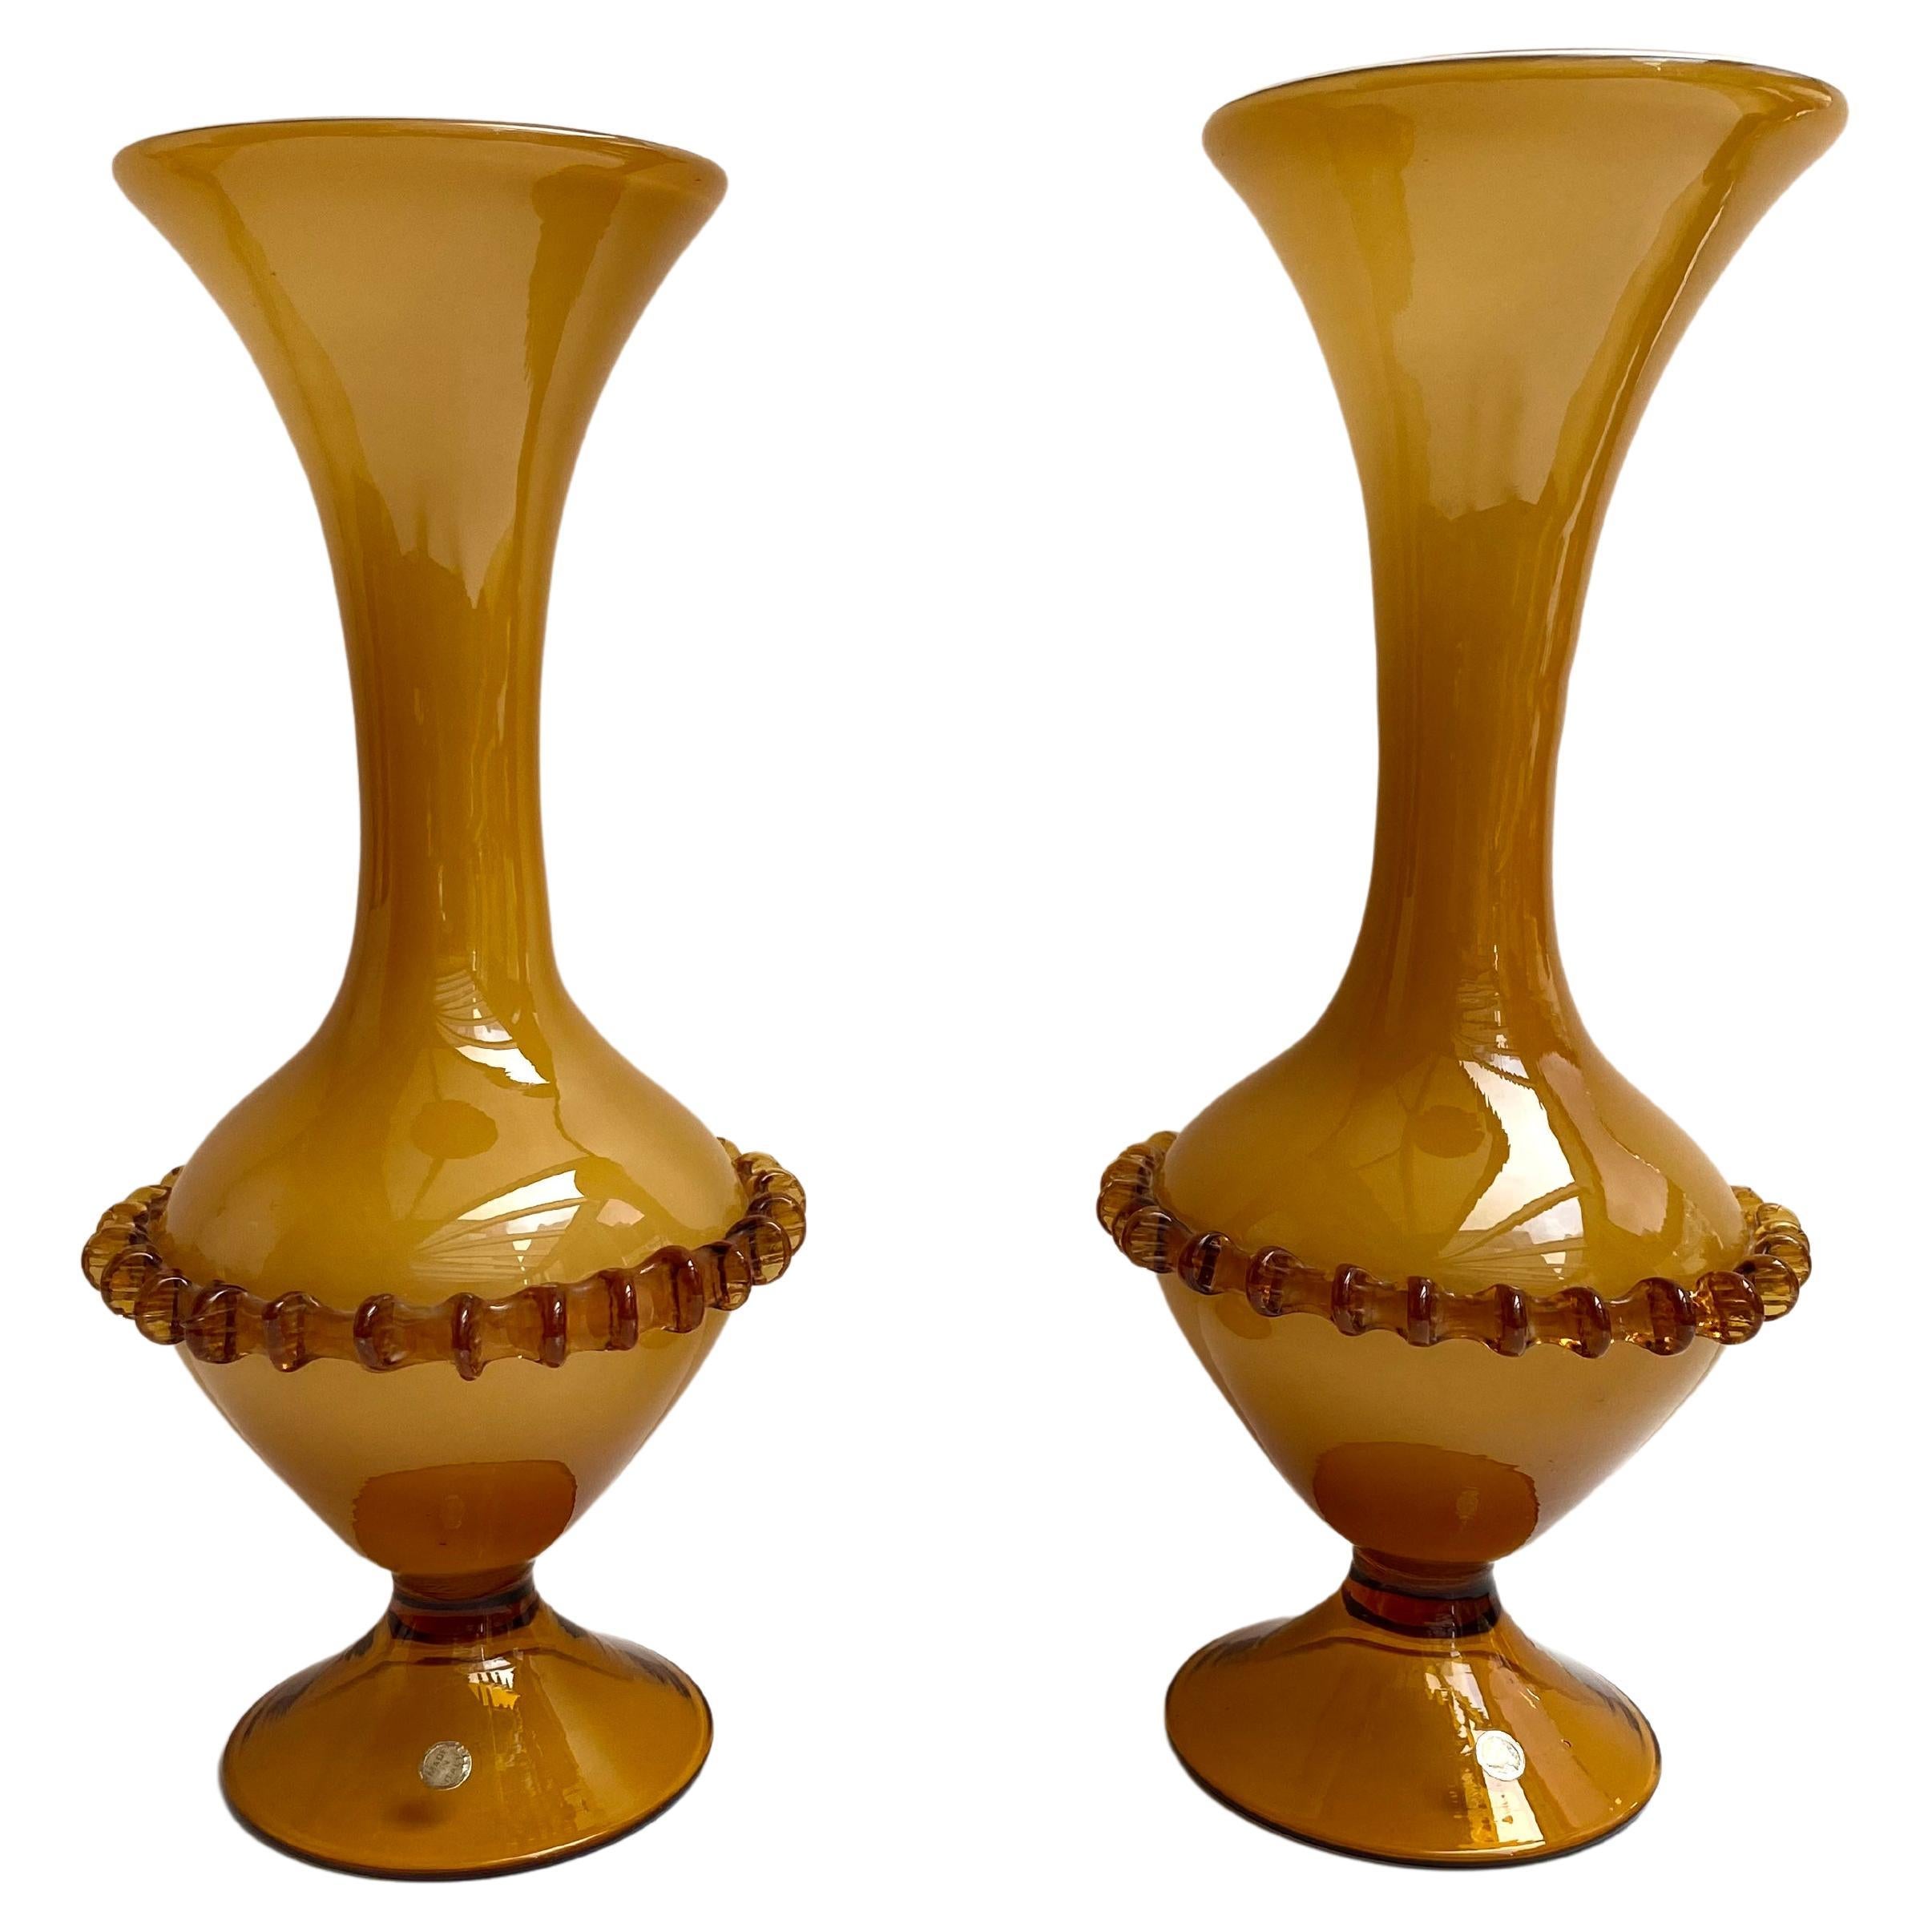 Vintage Paired Vases in Amazing Yellow Ochre Murano Glass Set 2, Italy For Sale